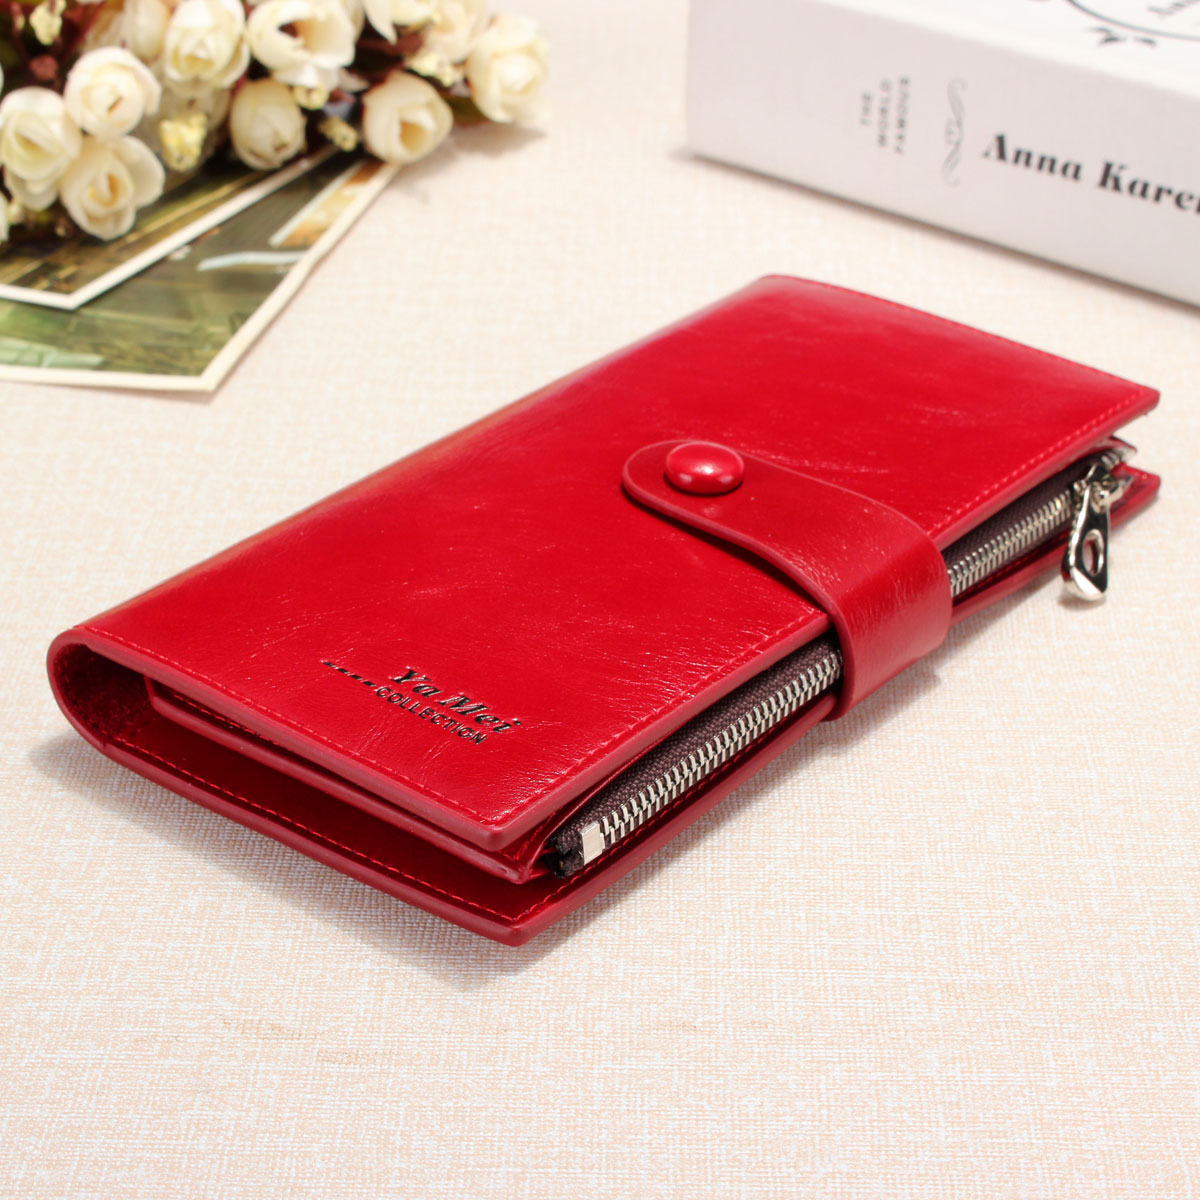 Fashion-Flip-Zippers-Large-Capacity-with-Multi-Card-Slots-Phone-ID-Card-Storage-Bag-PU-Leather-Women-1041669-9